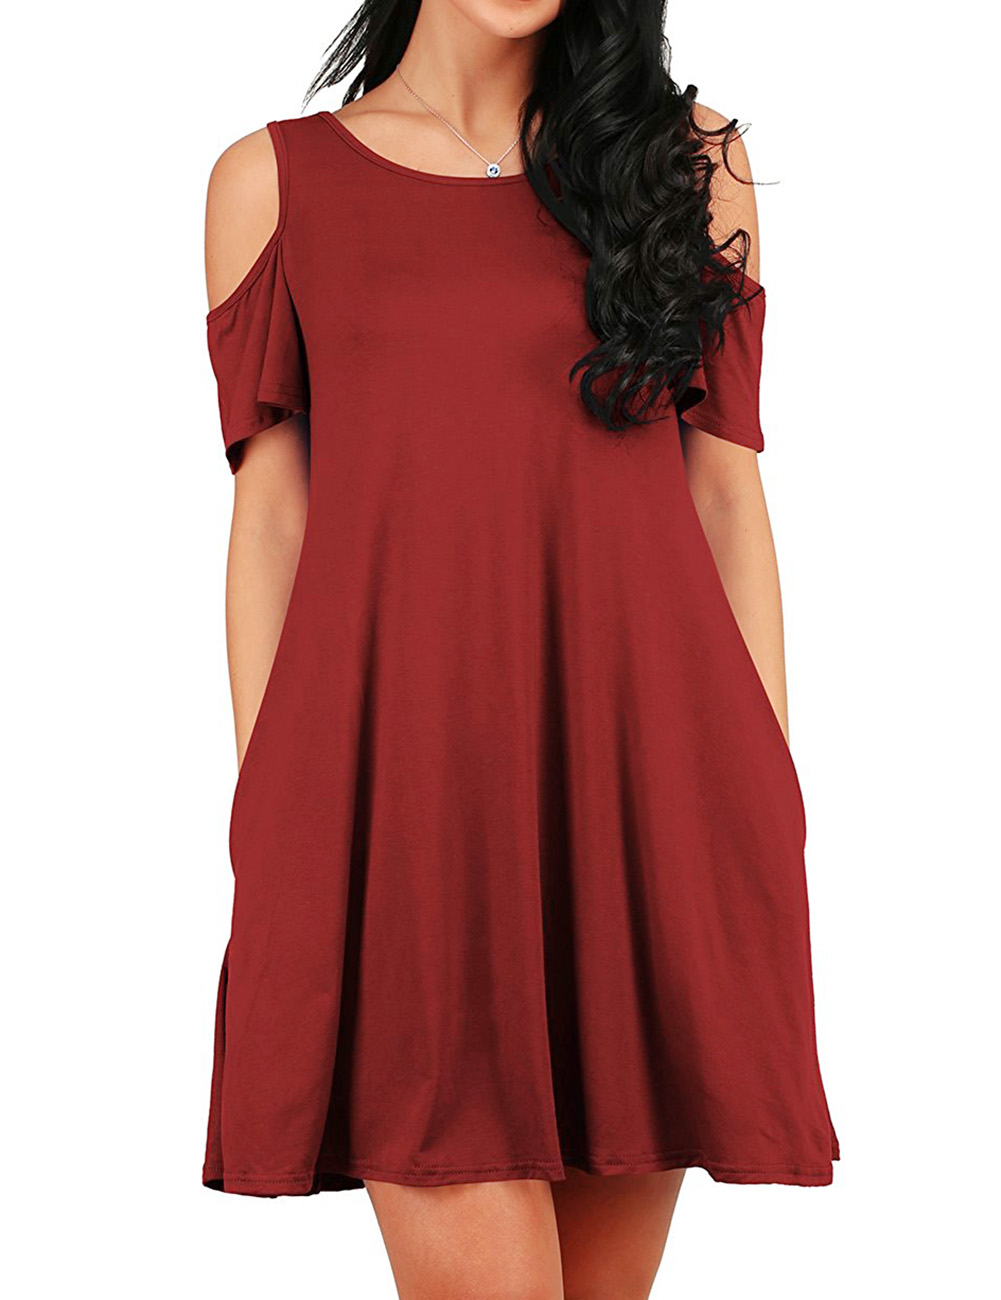 [US Direct] AMZPLUS Women’s Casual Cut Out Cold Shoulder Tunic Dress with Hand Pockets Burgundy_4XL